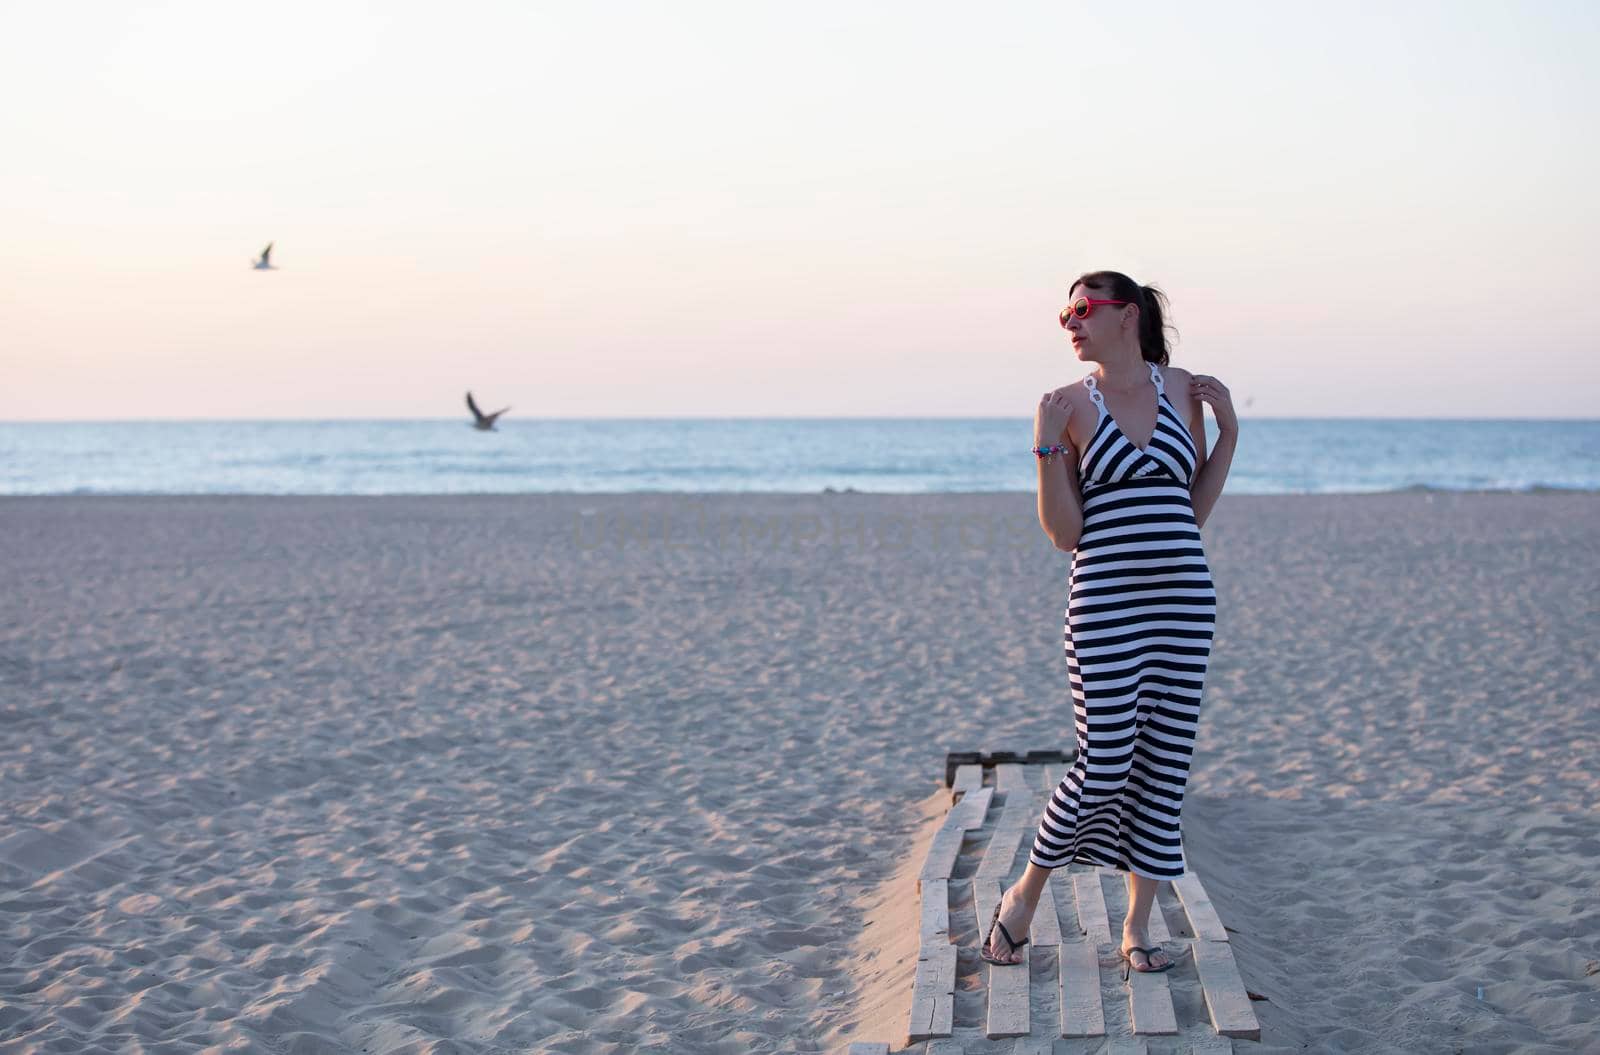 A woman in a striped dress stands on the seashore